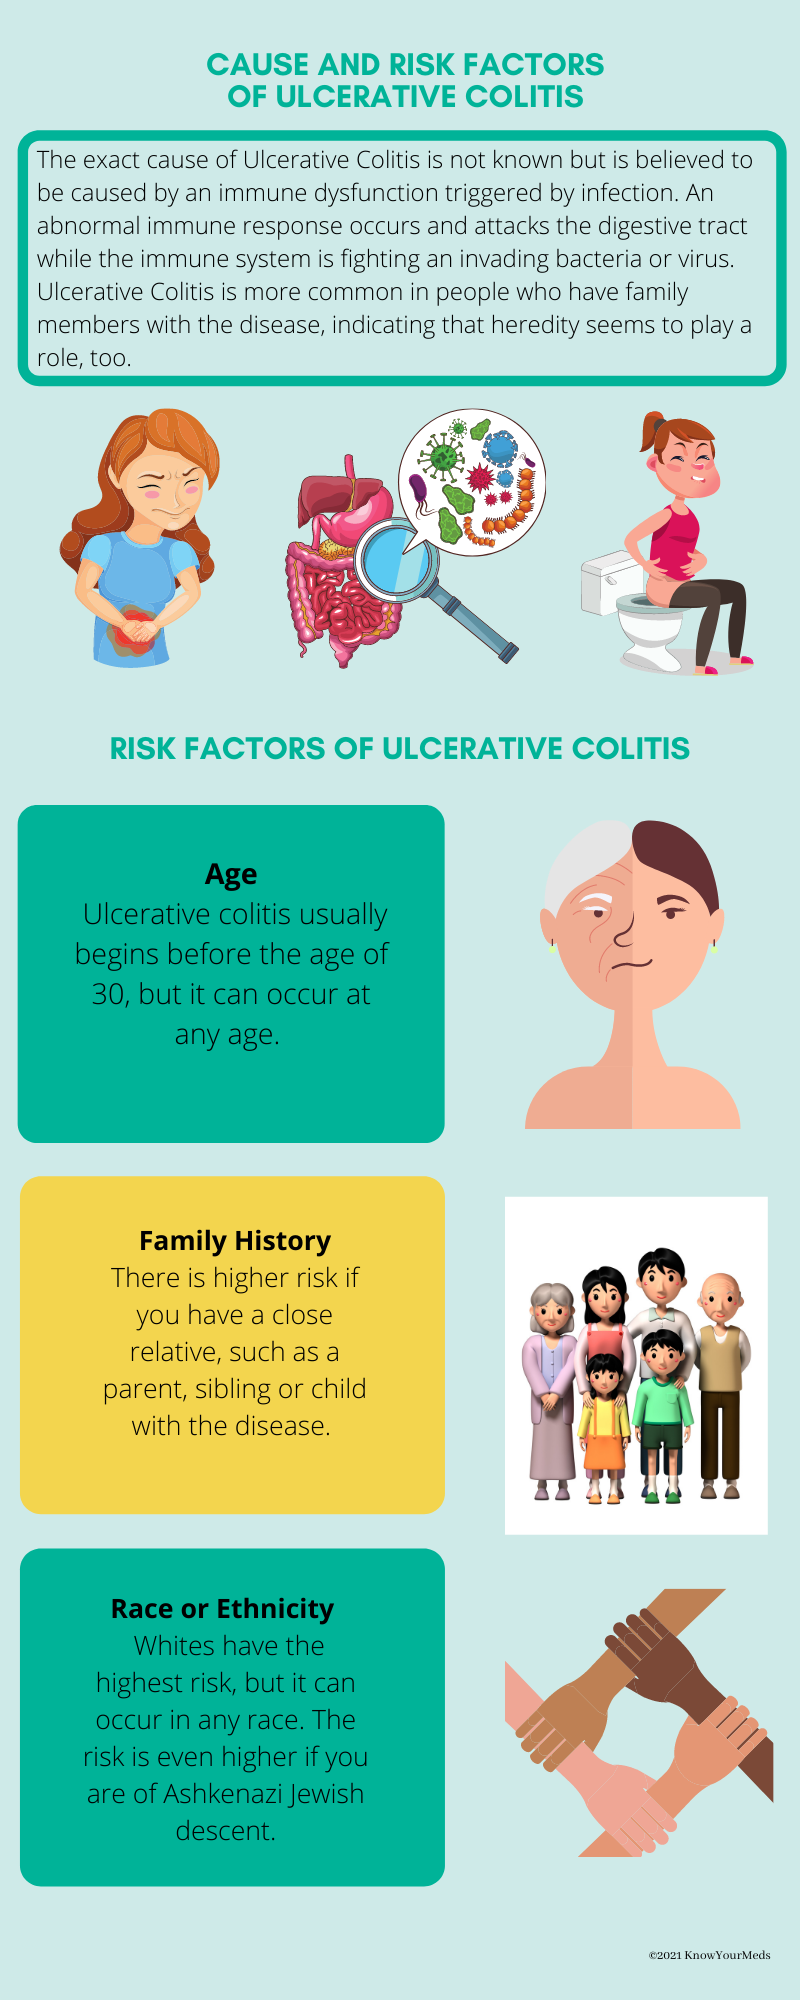 What Are the Cause and Risk Factors of Ulcerative Colitis?